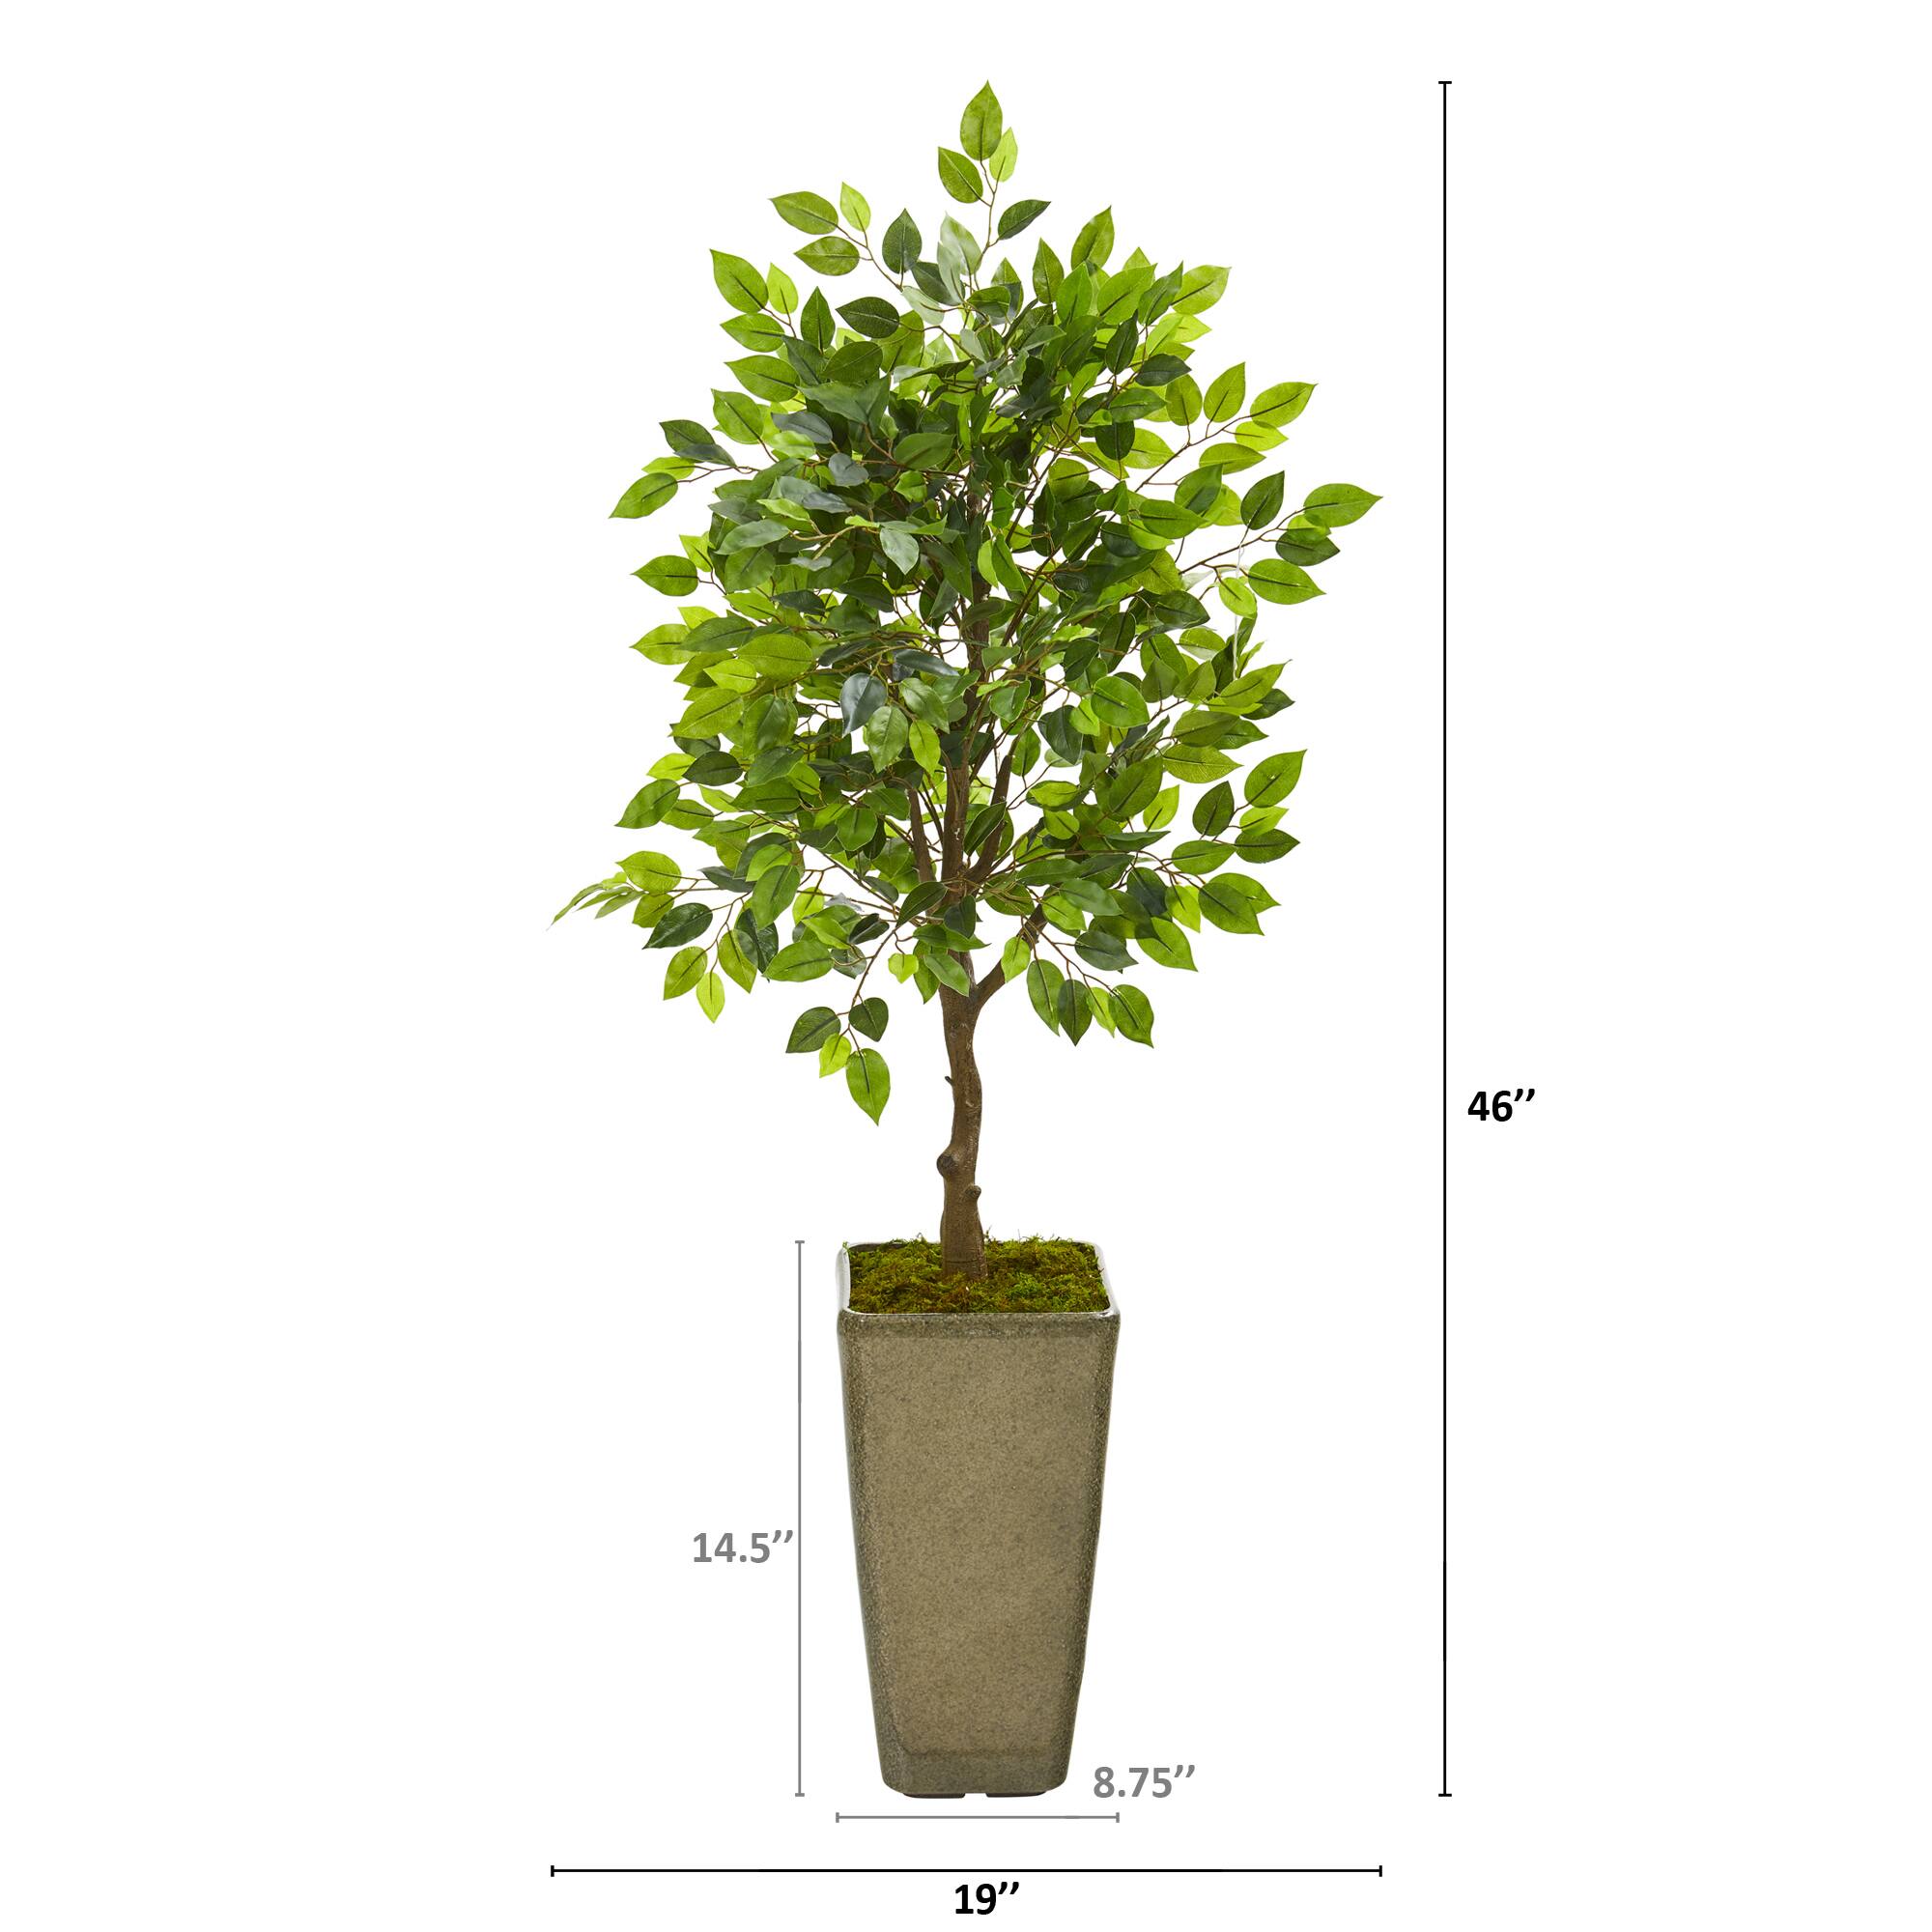 4ft. Ficus Tree in Green Planter | Michaels